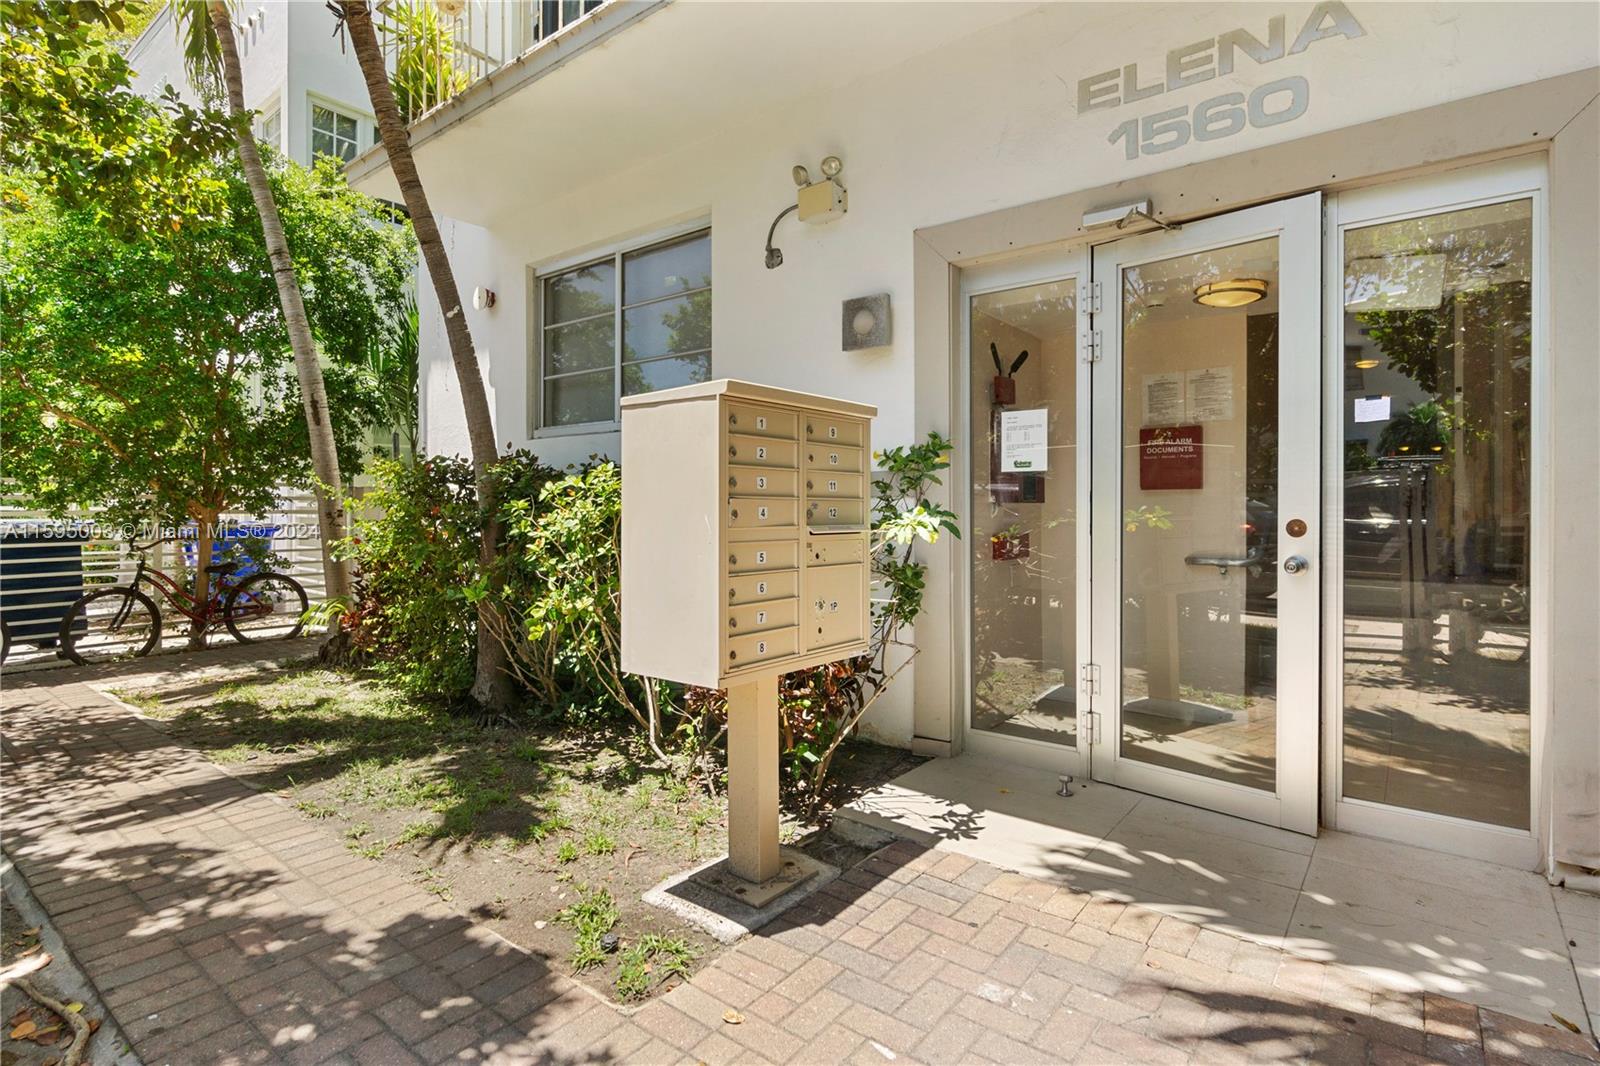 Great investment opportunity in Miami Beach! The flat is well divided and features wood ceramic floor all over, Italian style kitchen with stainless steel appliances, glass shower, washer and dryer. Wi-Fi included in the Monthly Maintenance. Elena condo is one of the best options to enjoy south beach with all the comforts and needs of a home, do not miss the opportunity to own it! Location is great, steps from Lincoln Rd mall and just a few blocks from the beaches.
Financing acceptable with min 50% down payment.